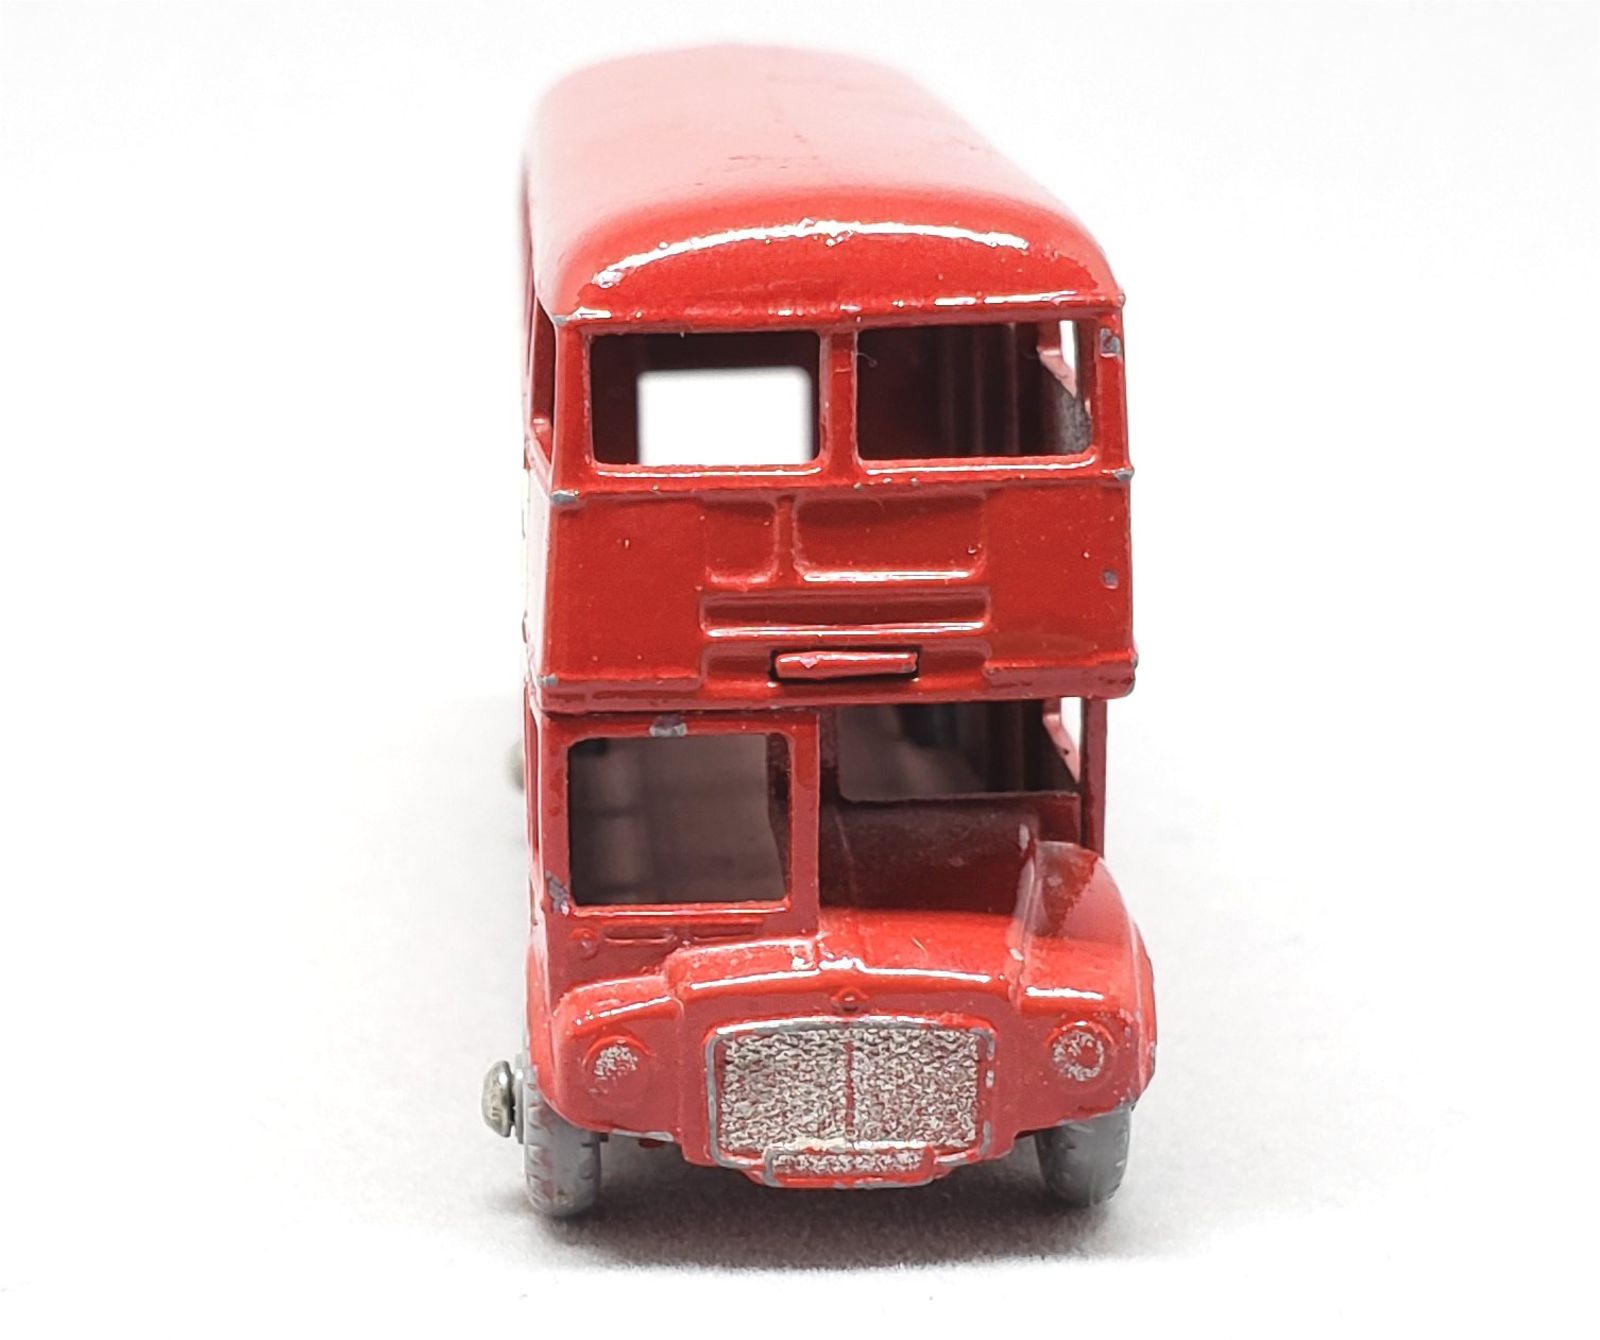 Illustration for article titled [REVIEW] Lesney Matchbox Routemaster Bus